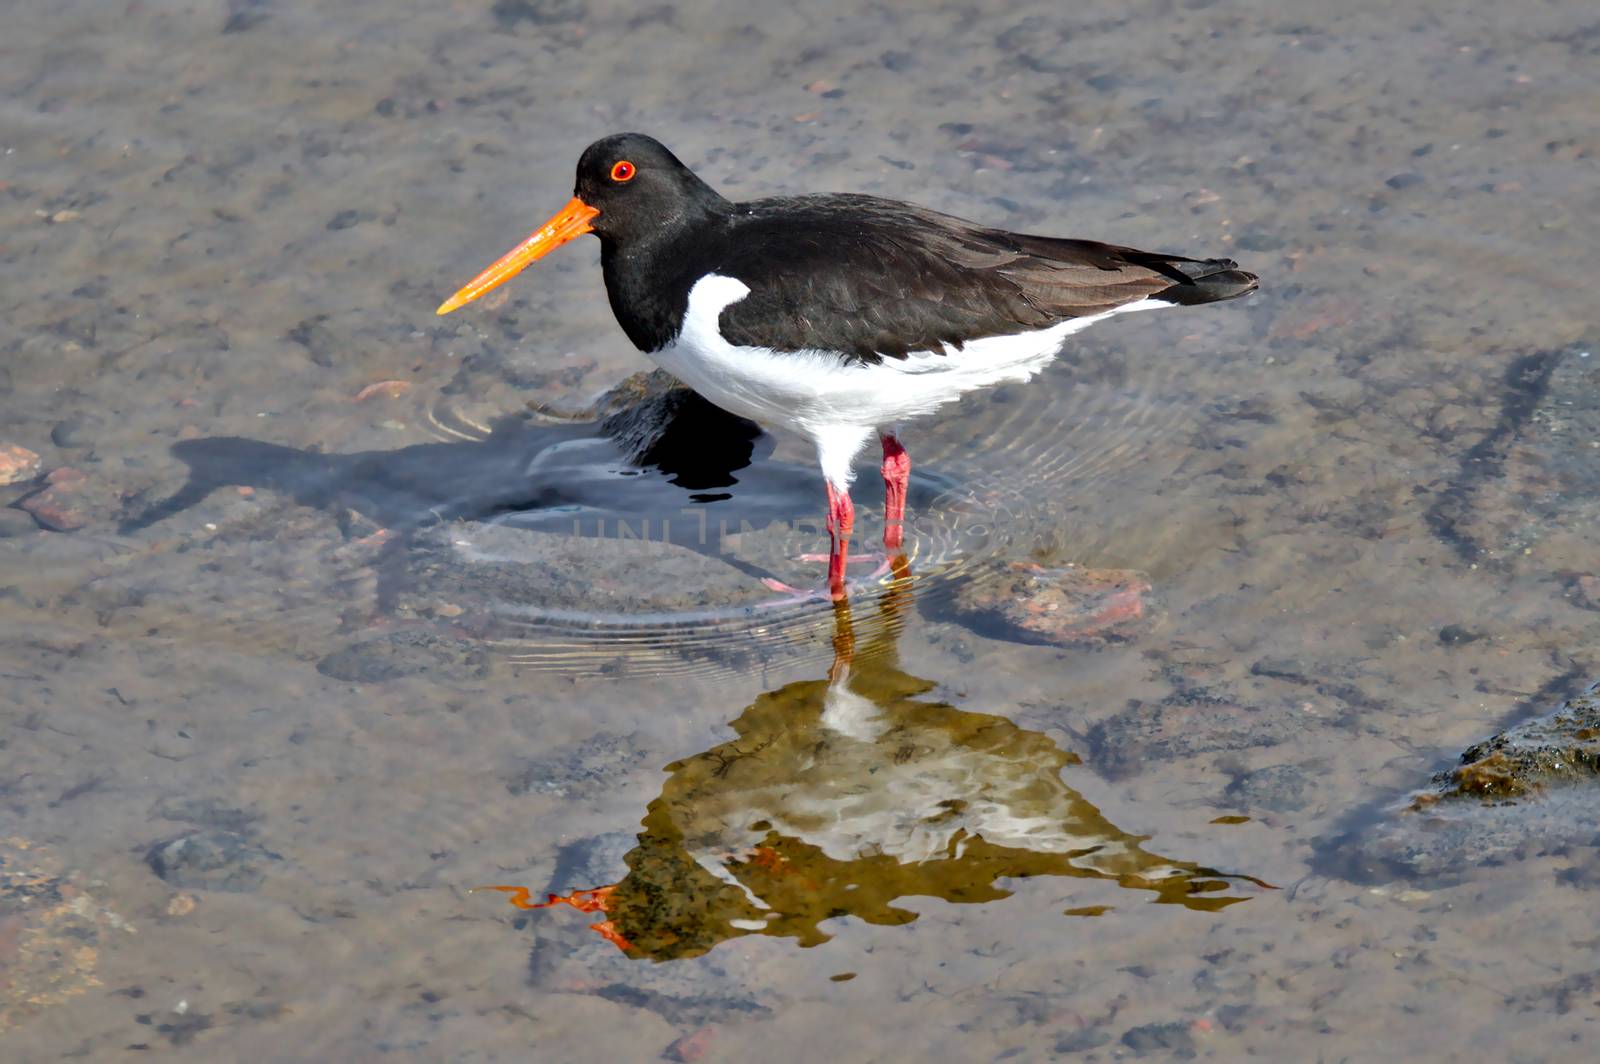 The Eurasian Oystercatcher walking in low water, looking for food. Close photo of sea bird with reflection on water surface.